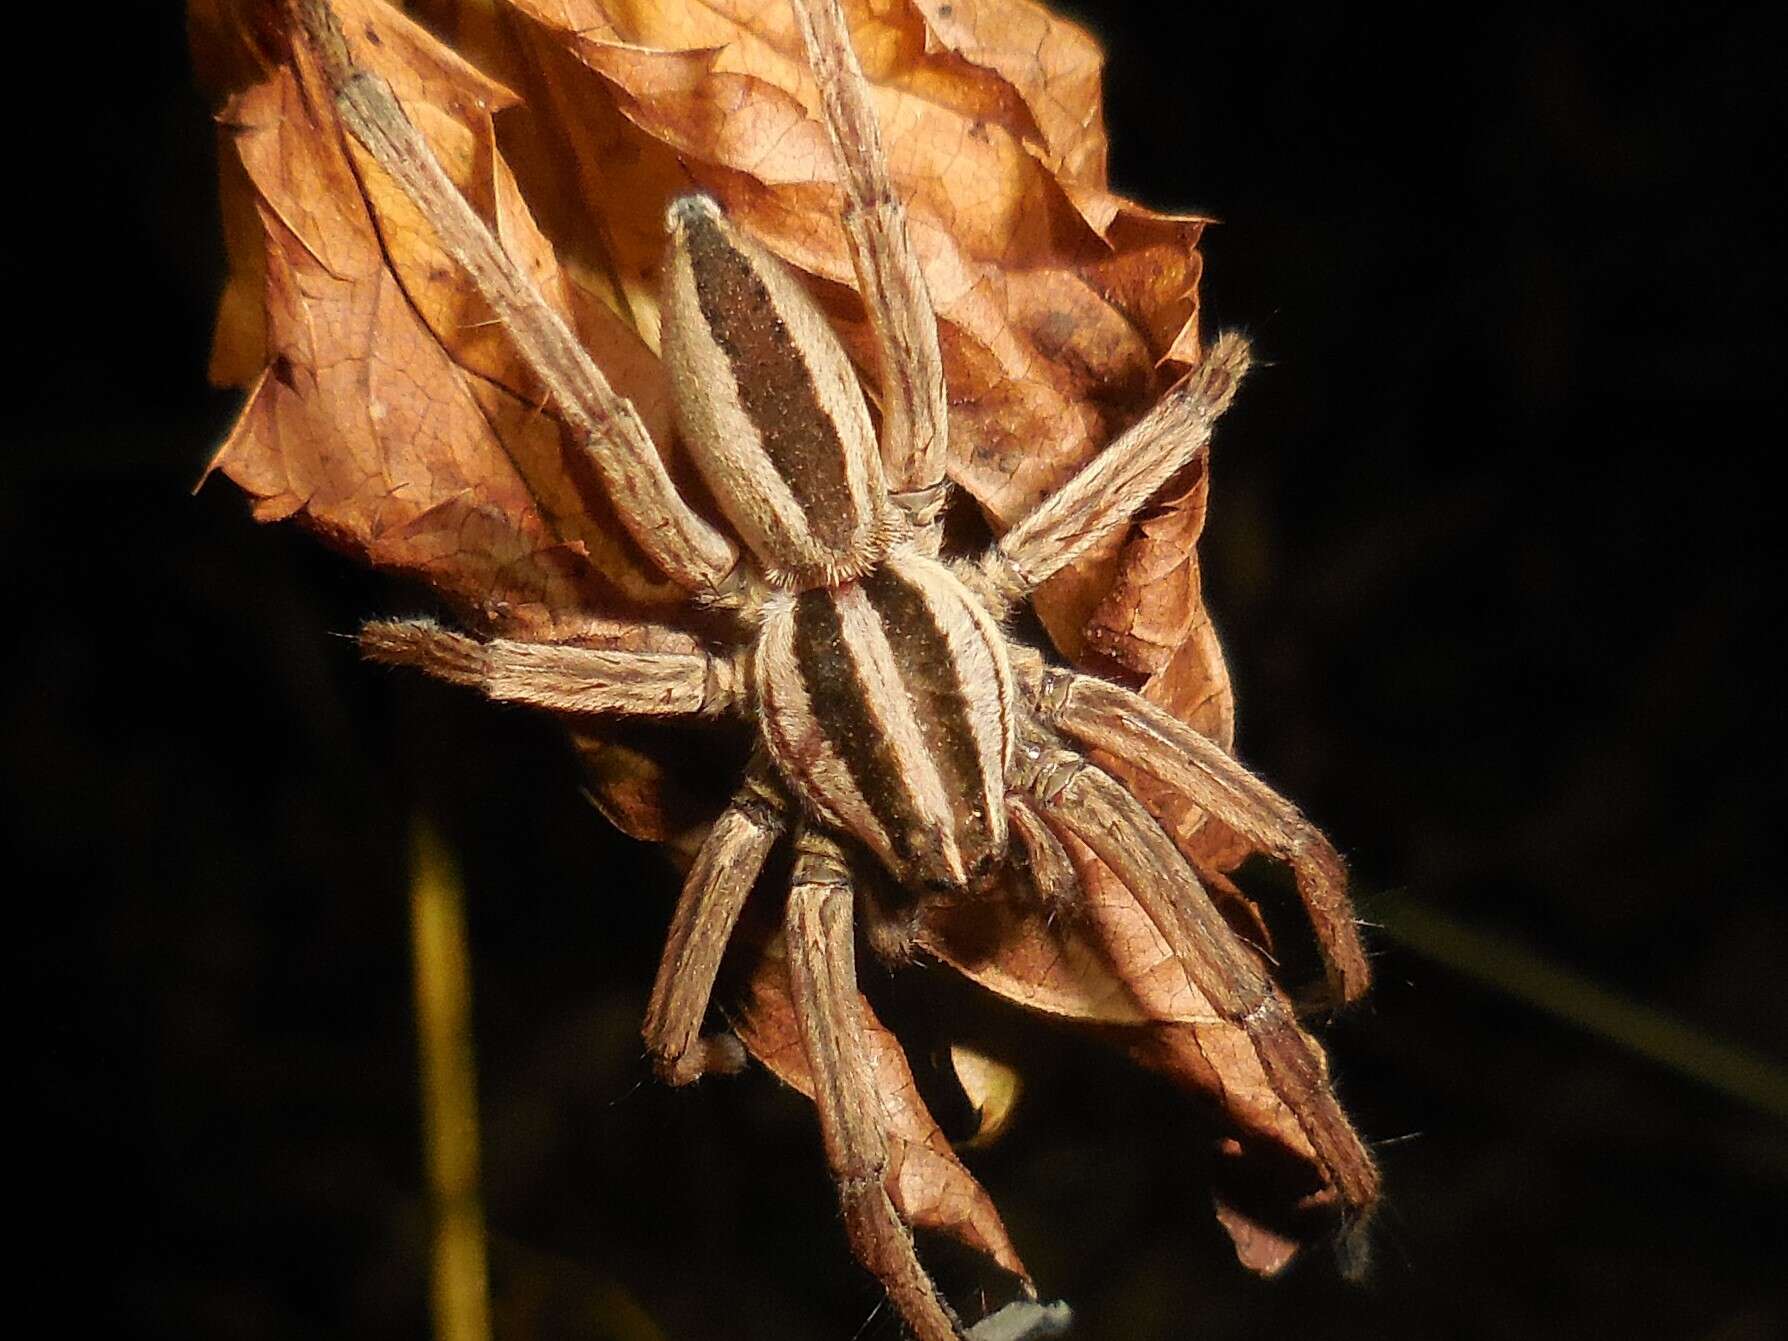 Image of Dotted Wolf Spider